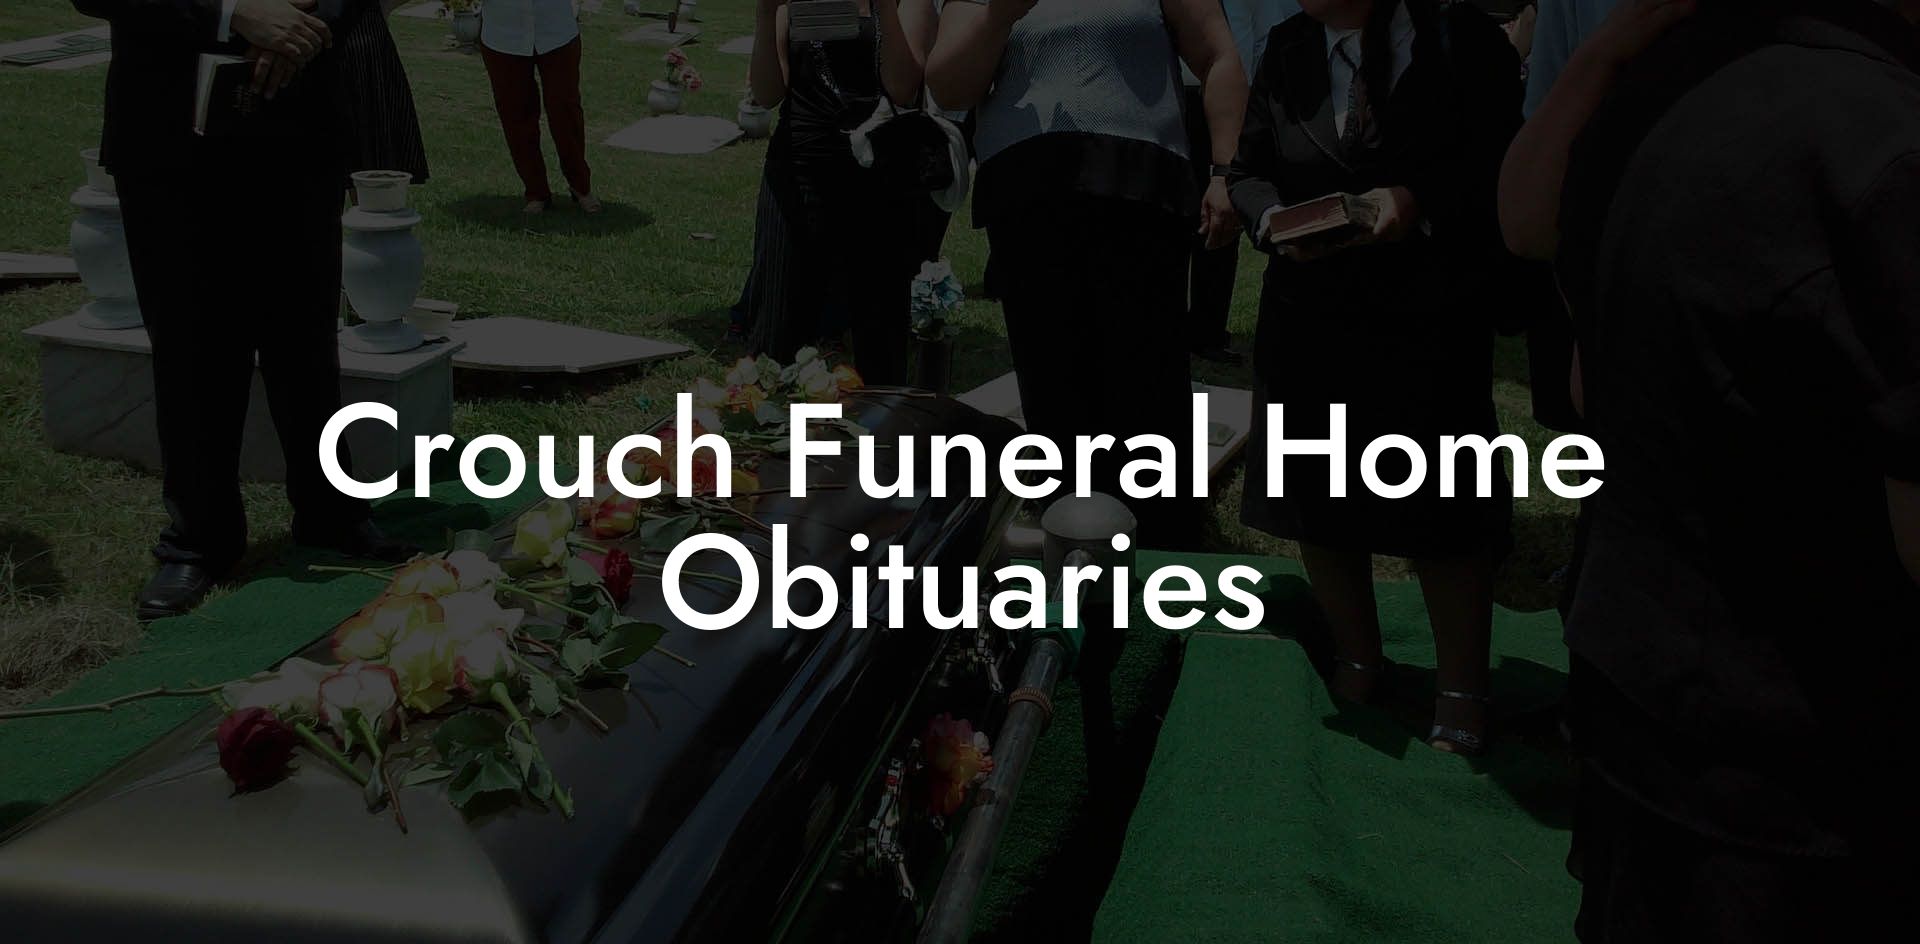 Crouch Funeral Home Obituaries